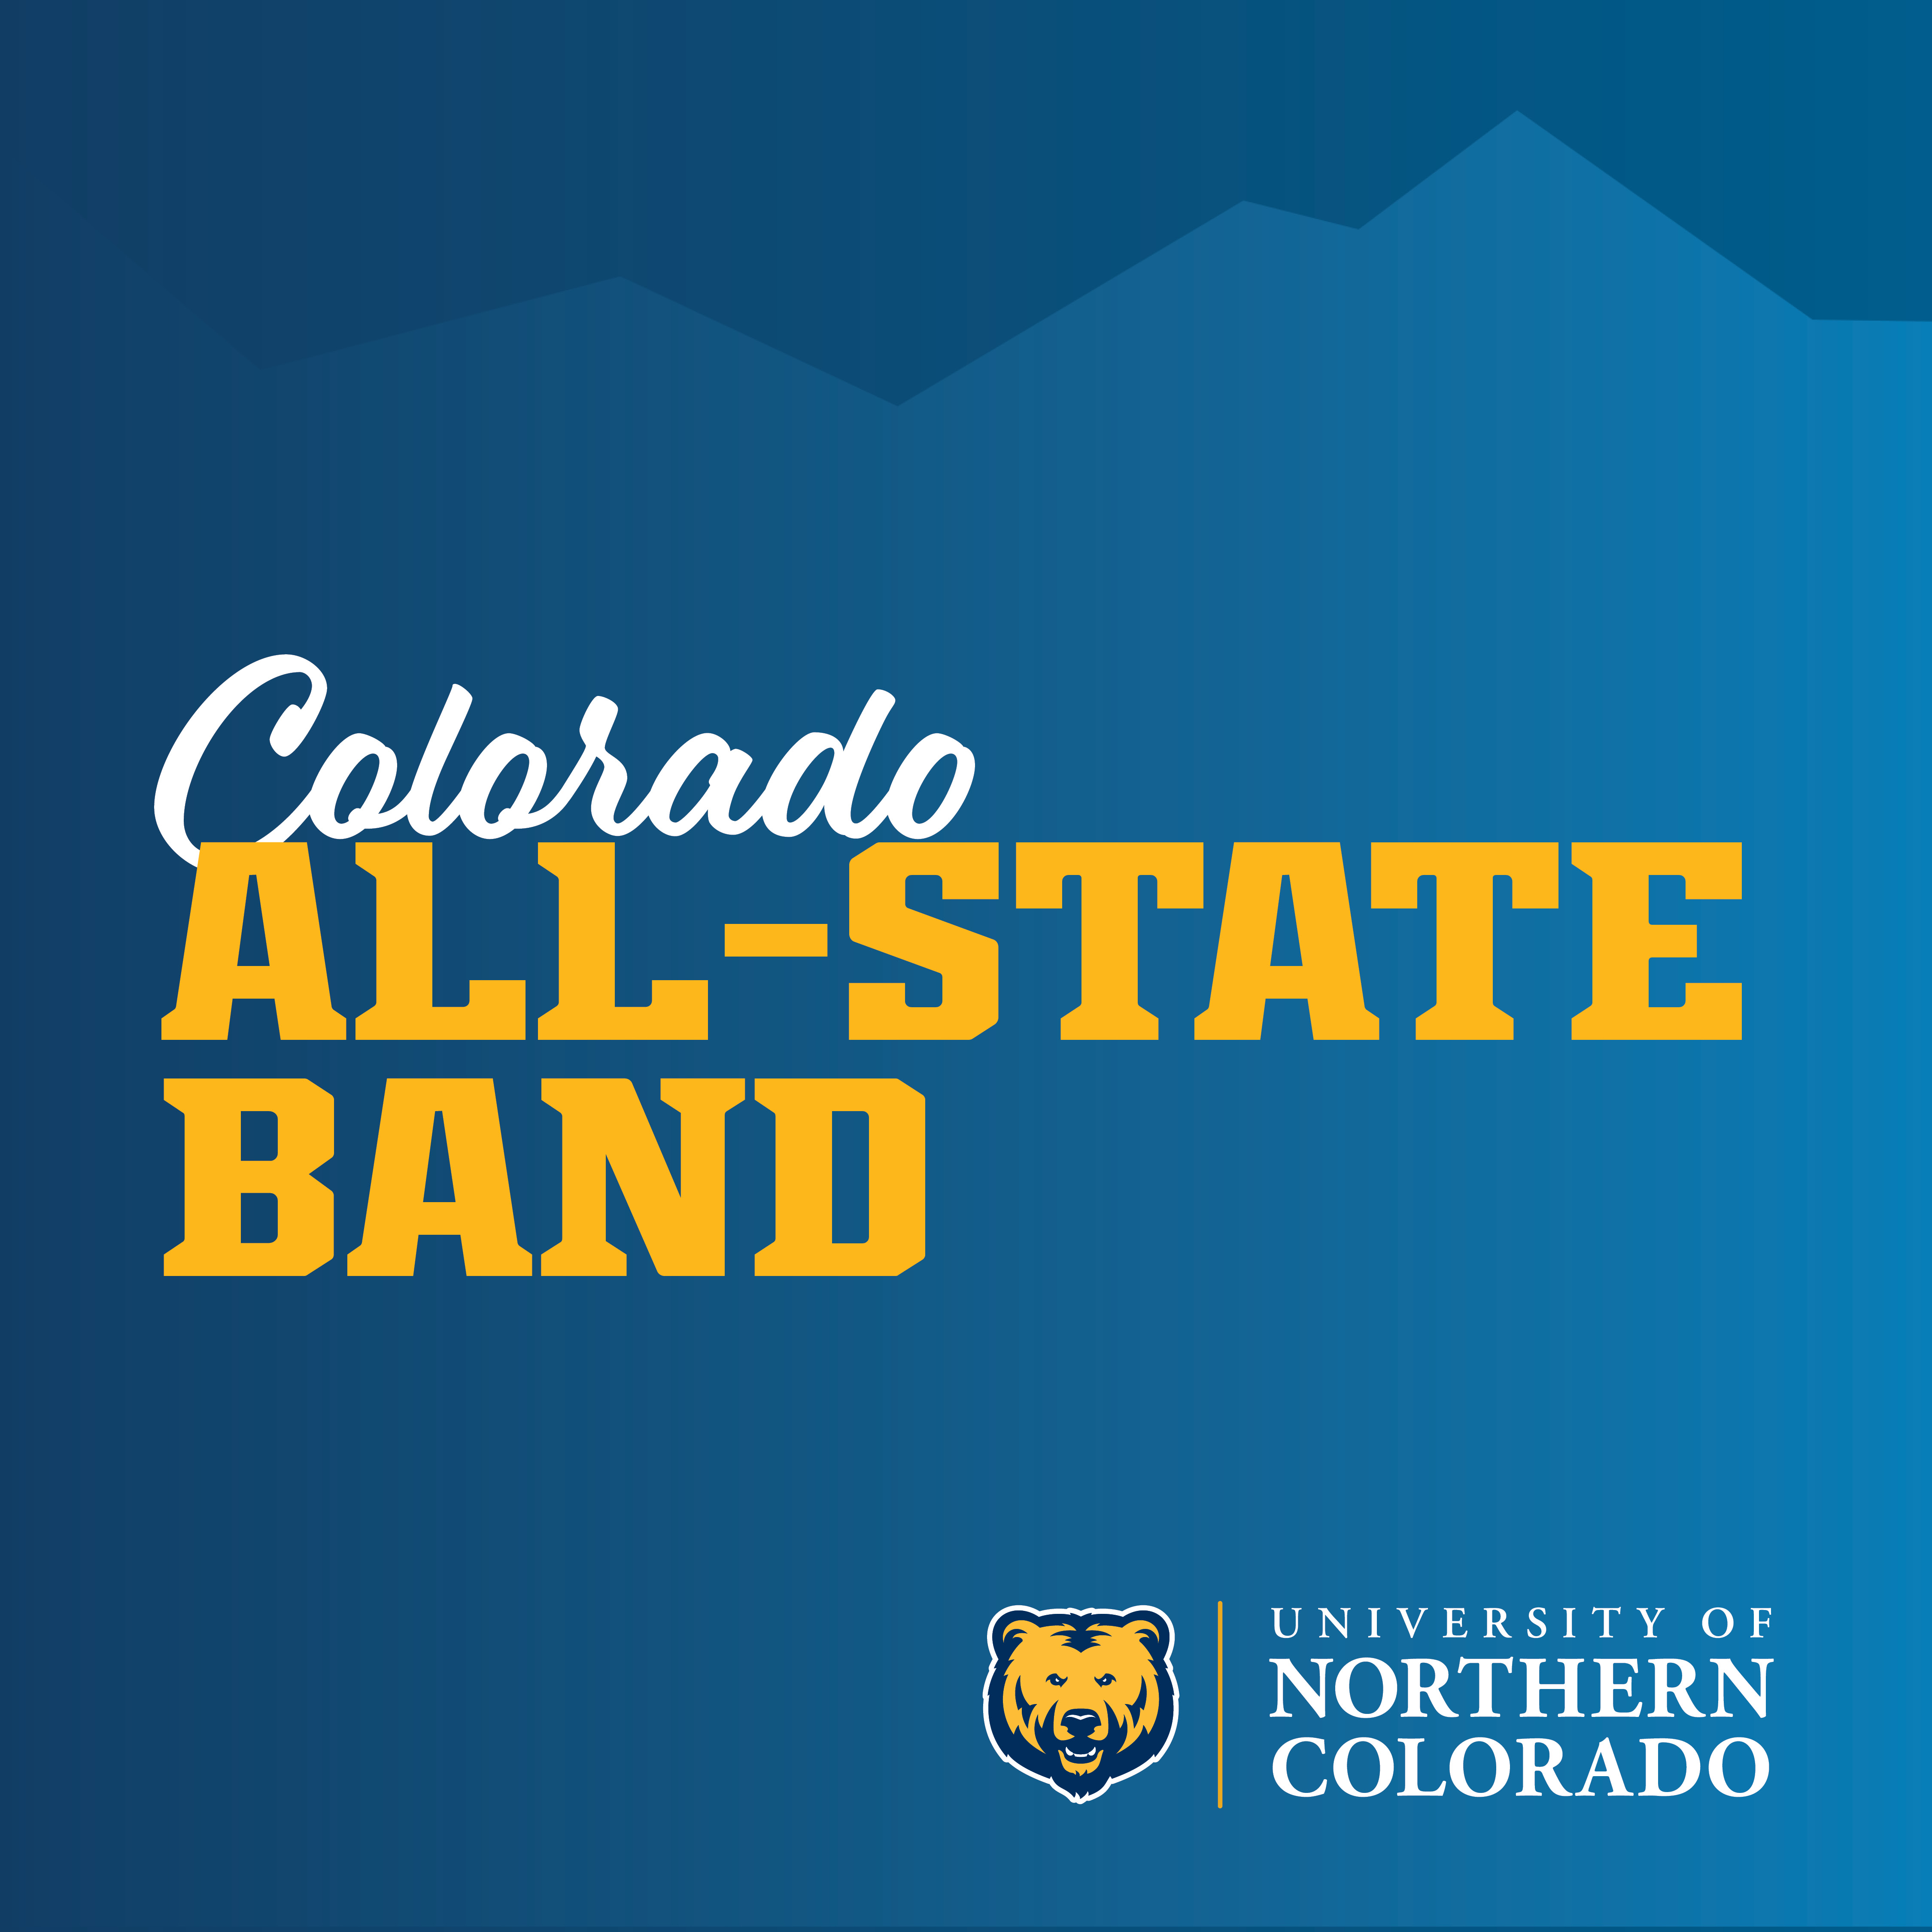 Colorado All State Bands